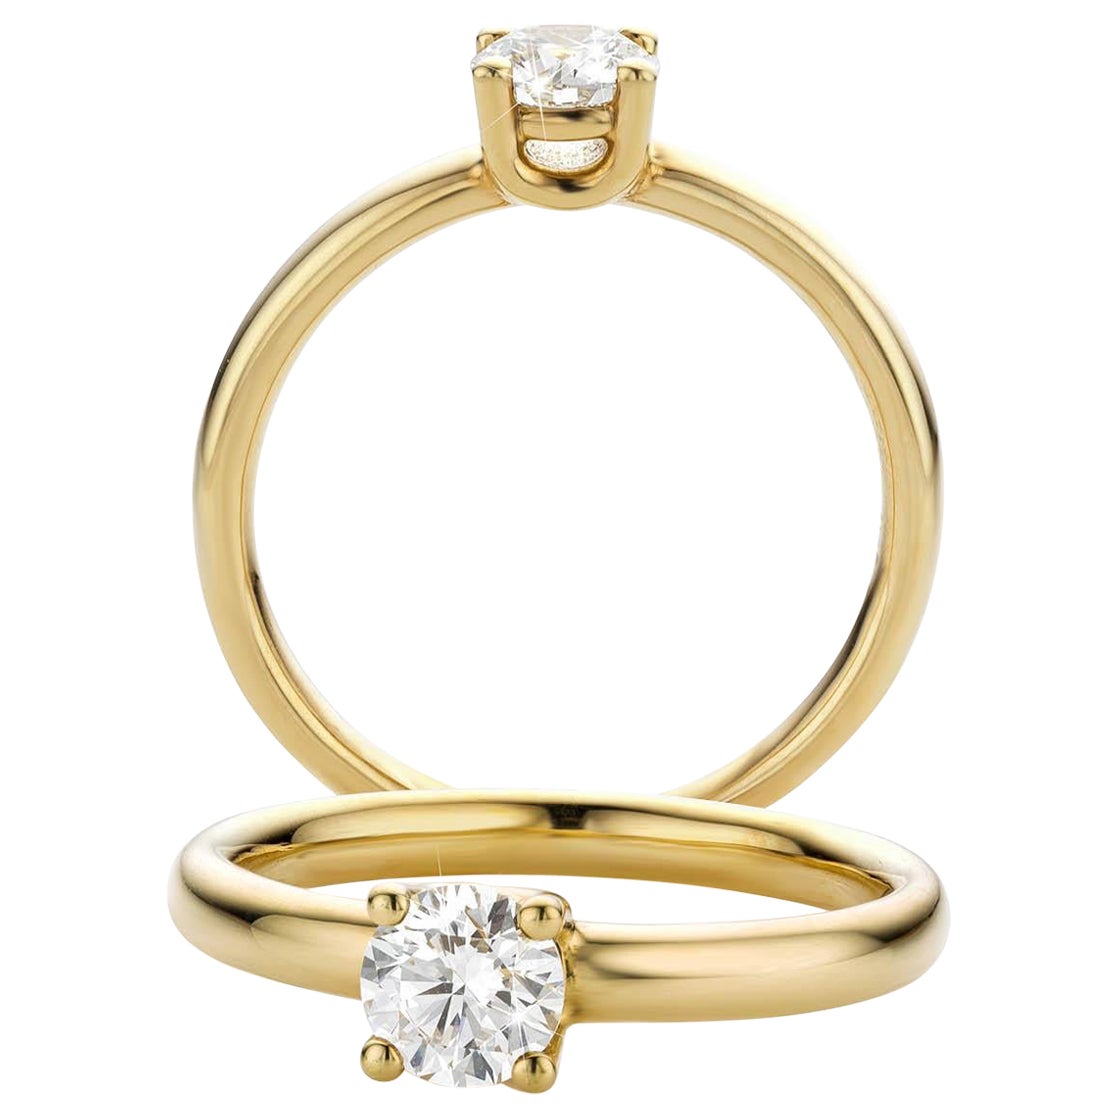 For Sale:  Cober “Classic Brilliant” Yellow Gold ring with a 0.50 ct. Brilliant-cut Diamond